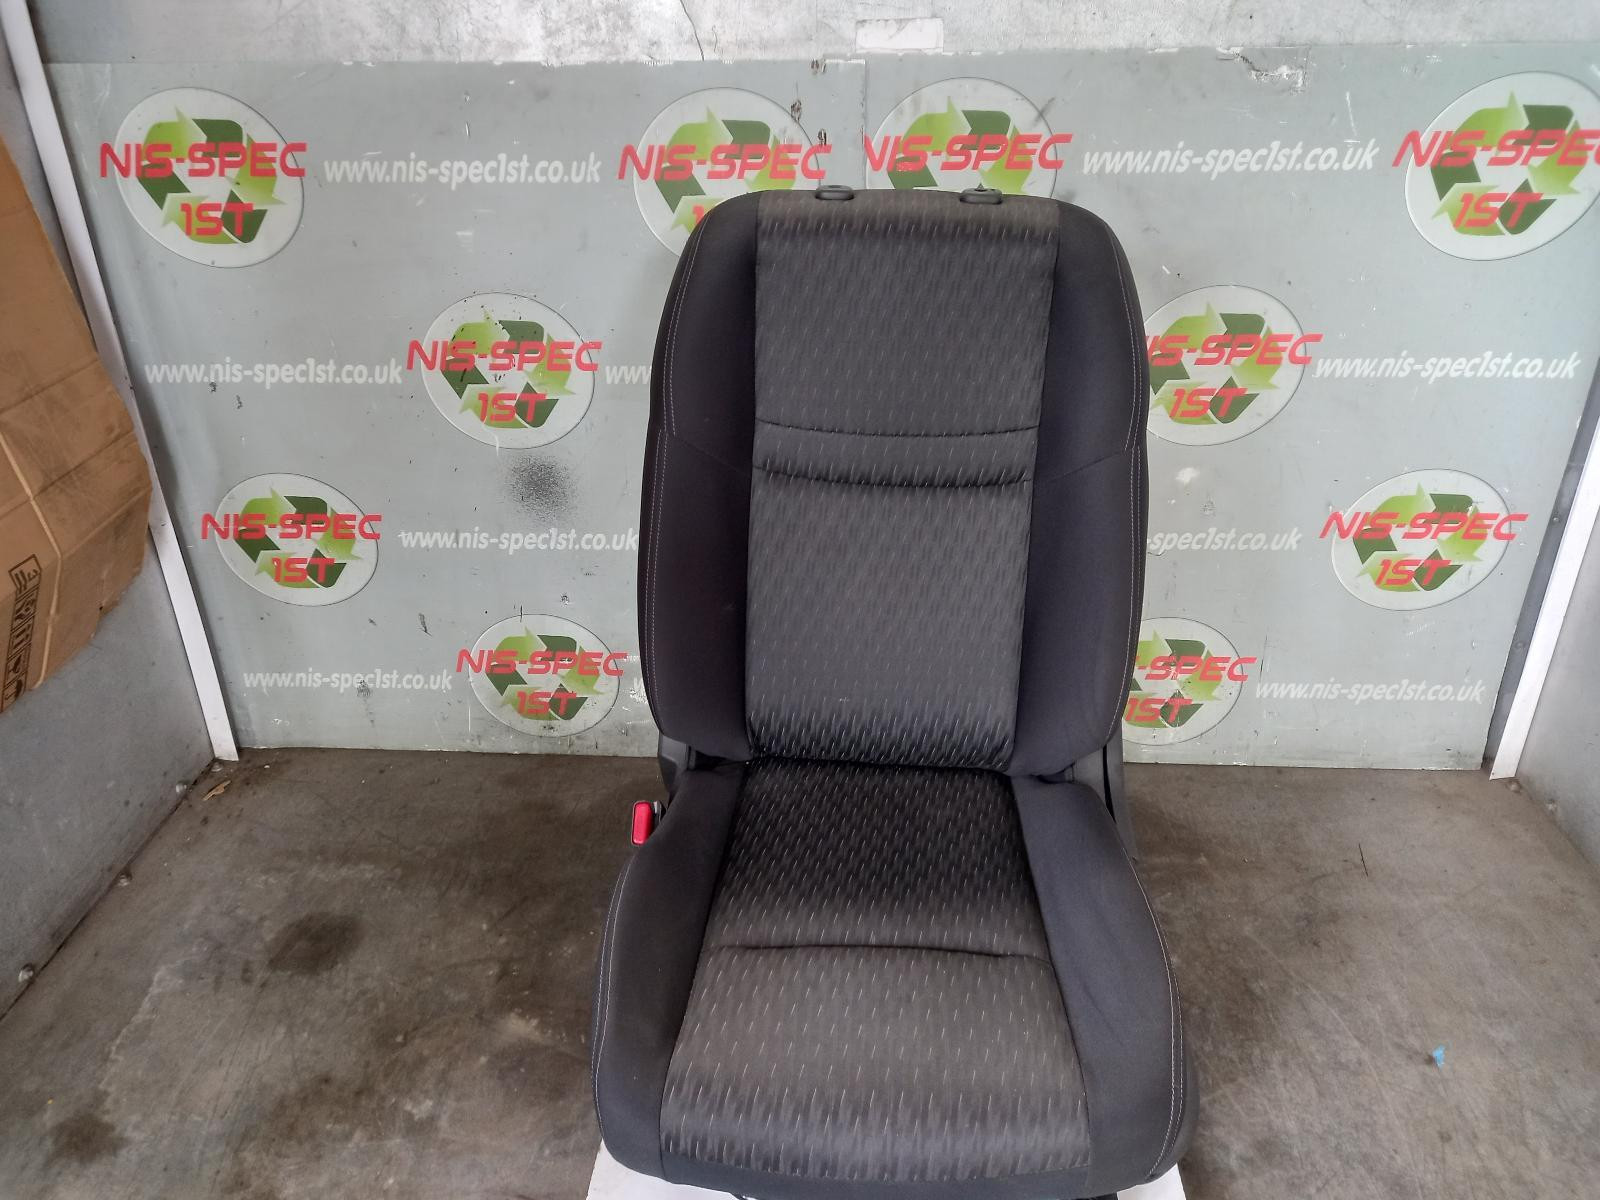 NISSAN X TRAIL FRONT SEAT